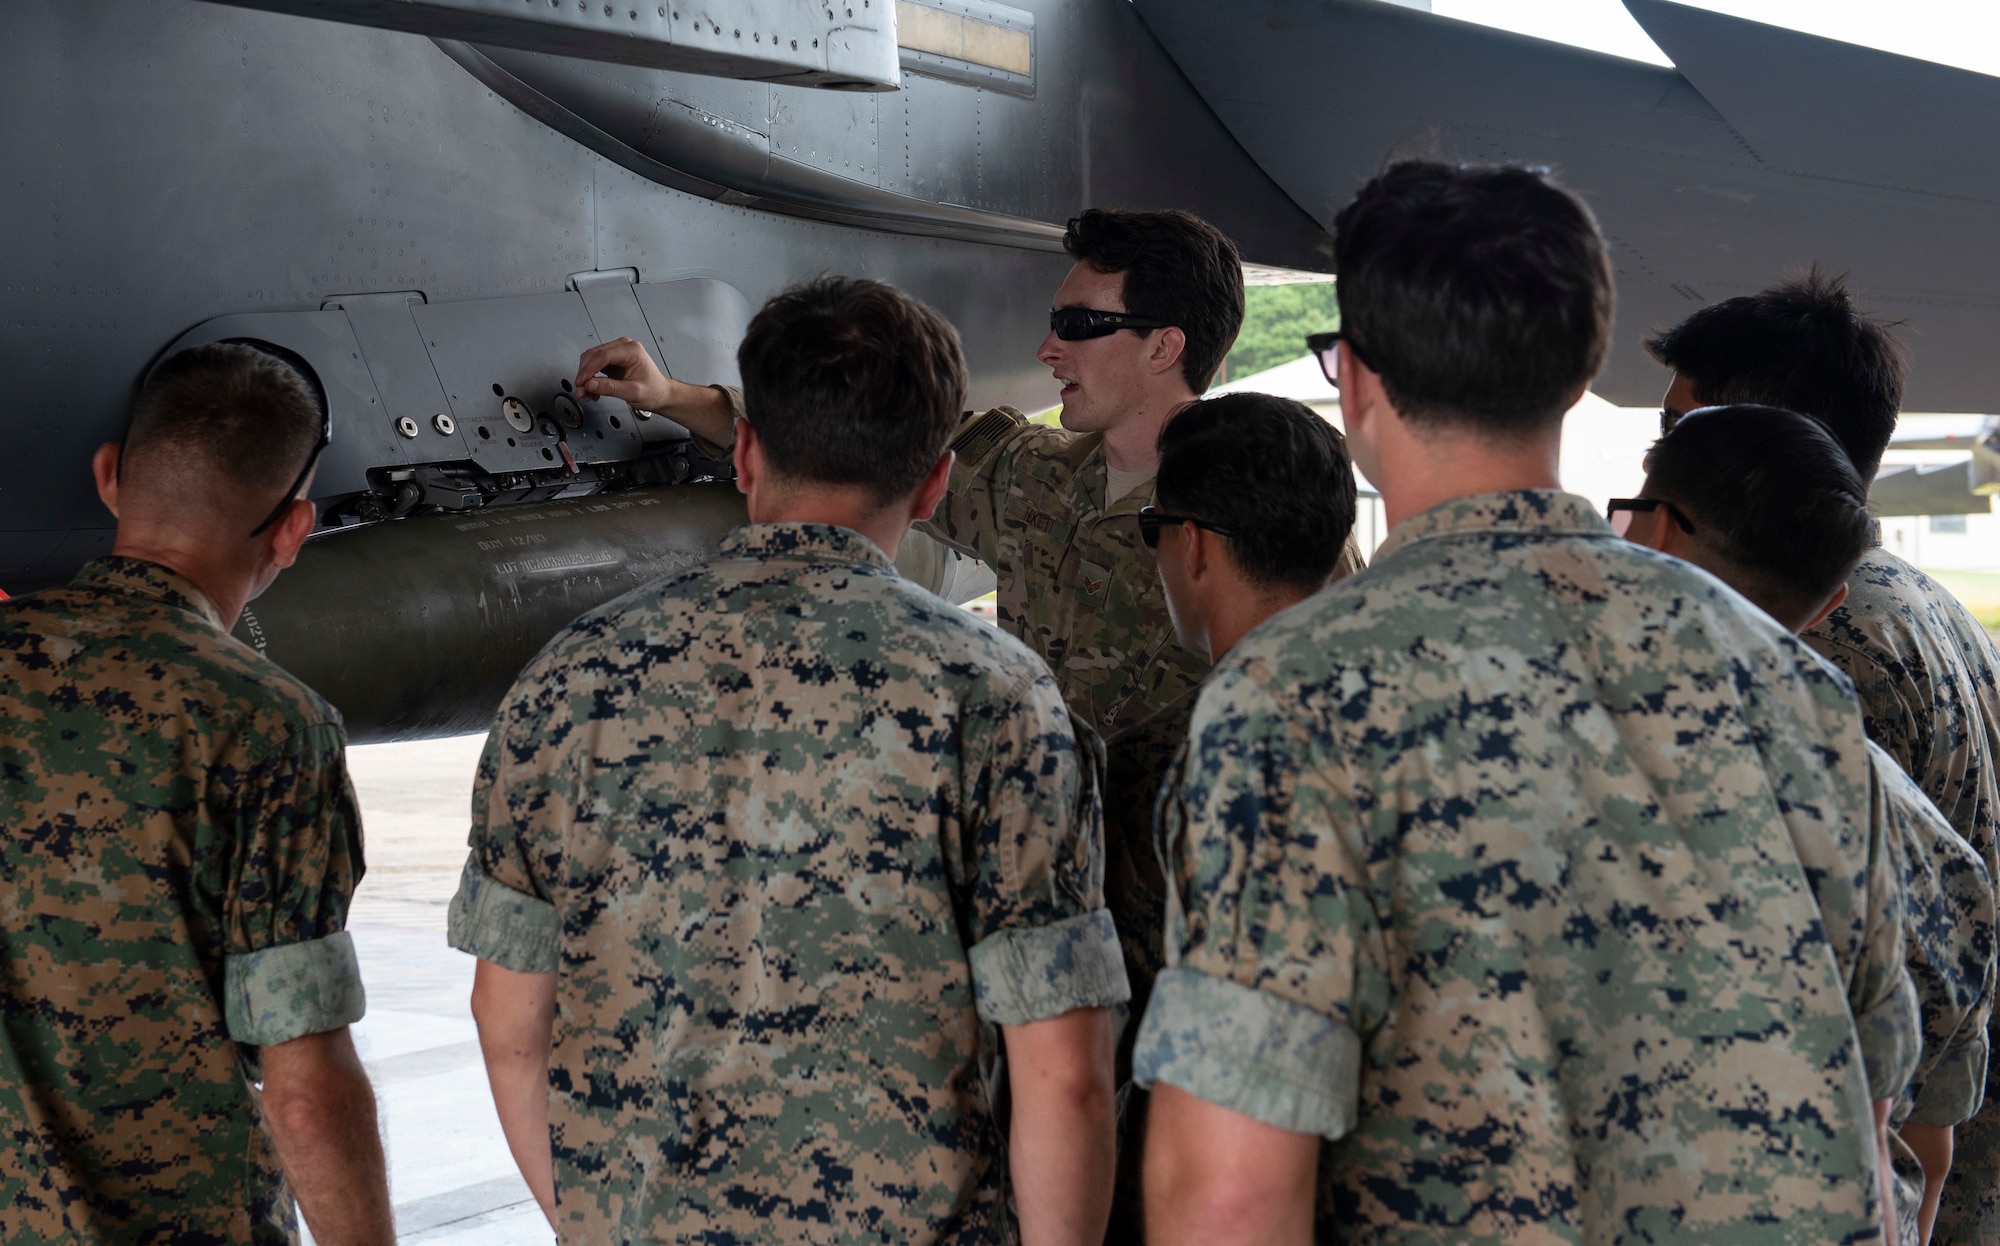 Senior Airman Kyle Heskett, 4th Civil Engineer Squadron explosive ordnance disposal technician, demonstrates how to disarm weapons on an F-15E Strike Eagle to U.S. Marines with EOD assigned to the 8th Engineer Support Battalion, 2nd Marine Logistics Group, August 14, 2019, at Seymour Johnson Air Force Base, North Carolina. The training and familiarization helped the Marines maintain their valuable skillsets as EOD personnel. (U.S. Air Force photo by Senior Airman Kenneth Boyton)